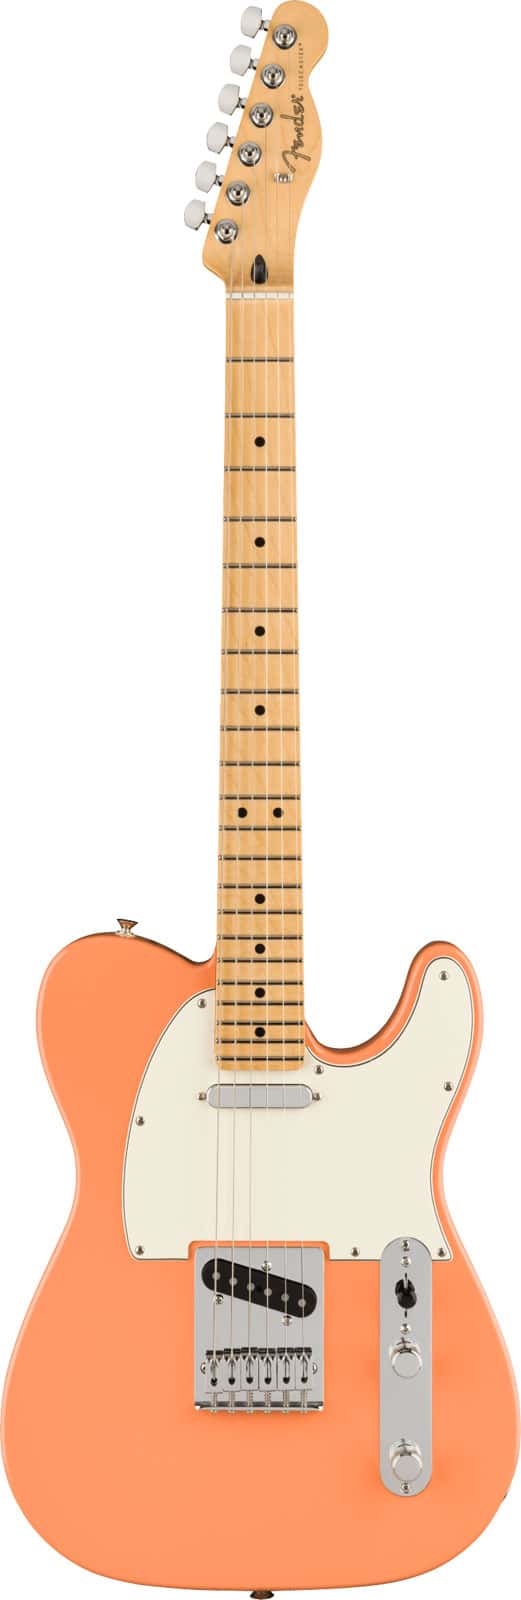 FENDER MEXICAN LTD PLAYER TELECASTER MN PACIFIC PEACH